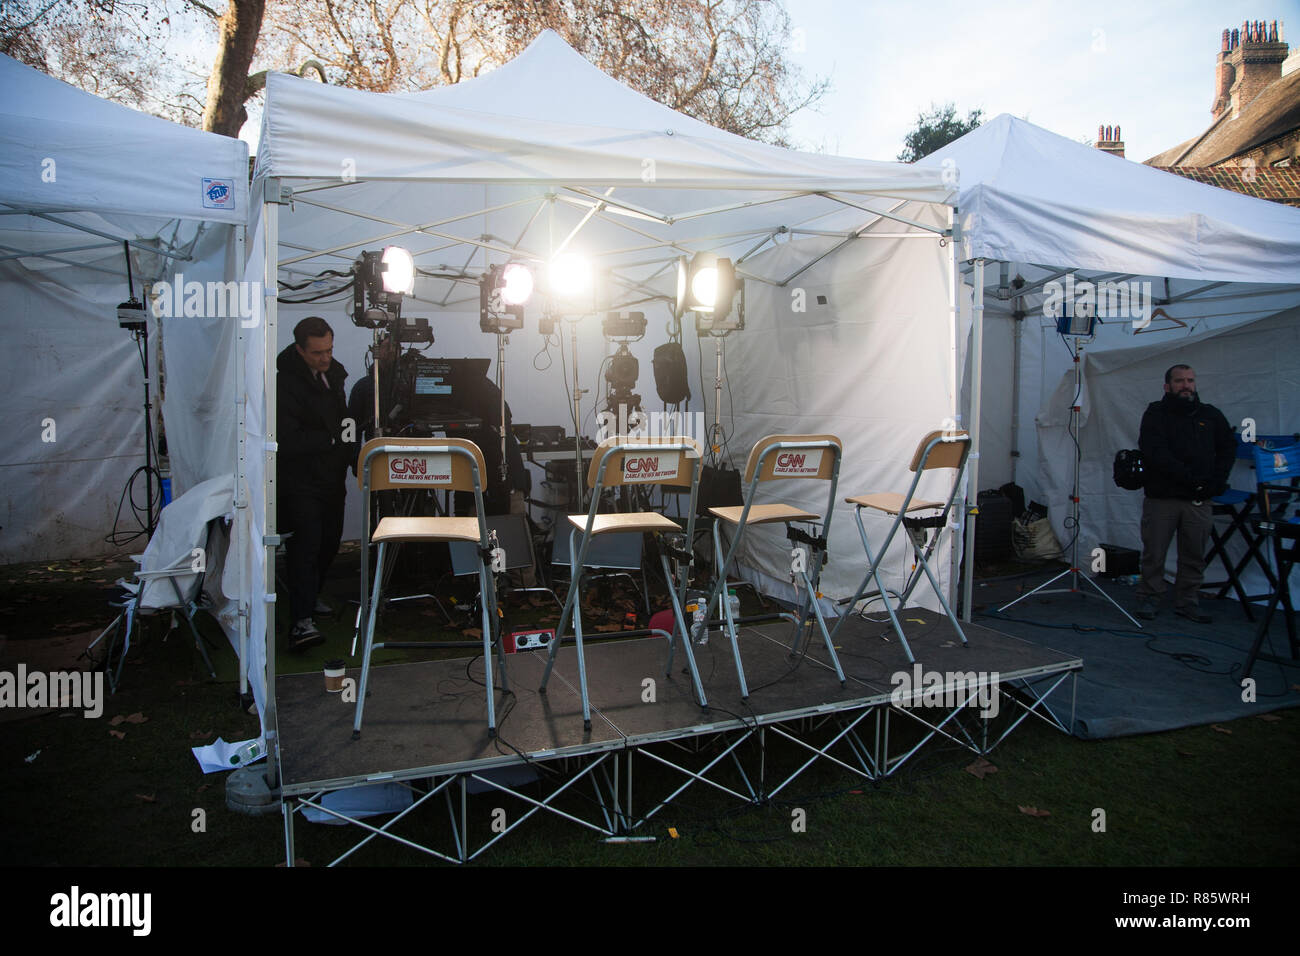 London UK. 13th December 2018. Special erected Media tents used for  the political coverage of the Brexit crisis by national and international news services at College Green Parliament as Prime Minister  a day after Prime Minister Theresa May won a confidence vote by 200-117 and will not be challenged for 12 months under the rules of the Conservative Party Credit: amer ghazzal/Alamy Live News Stock Photo